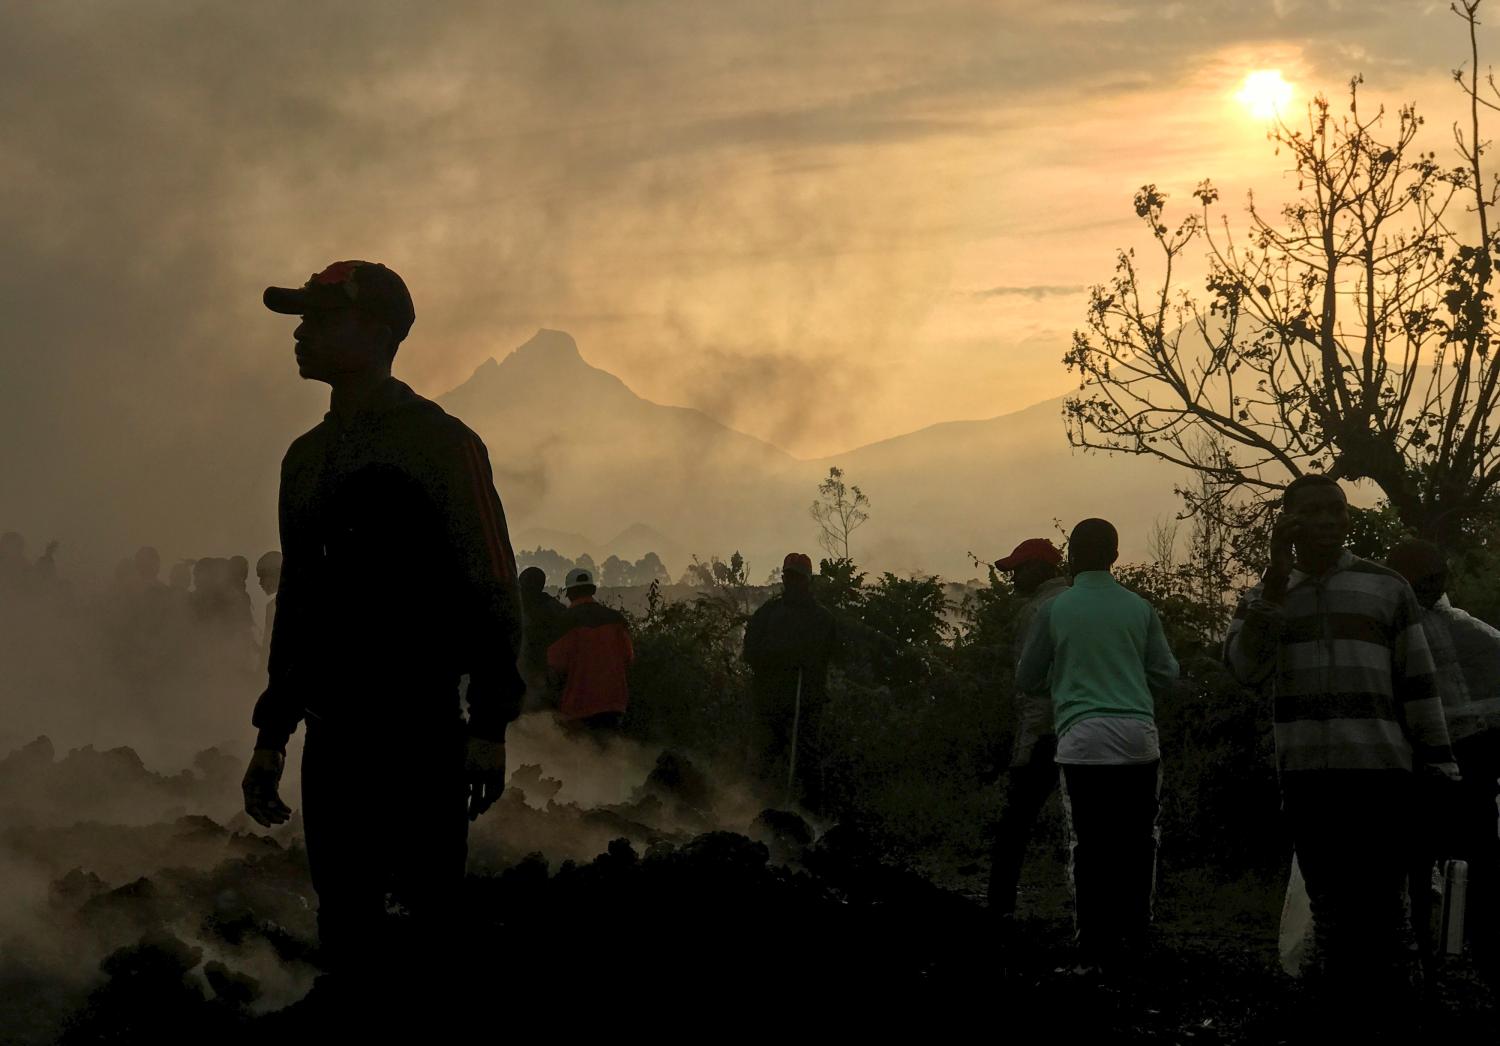 Residents walk near destroyed homes with the smouldering lava deposited by the eruption of Mount Nyiragongo volcano near Goma, in the Democratic Republic of Congo May 23, 2021. REUTERS/Djaffar Al Katanty       NO RESALES. NO ARCHIVES.     TPX IMAGES OF THE DAY